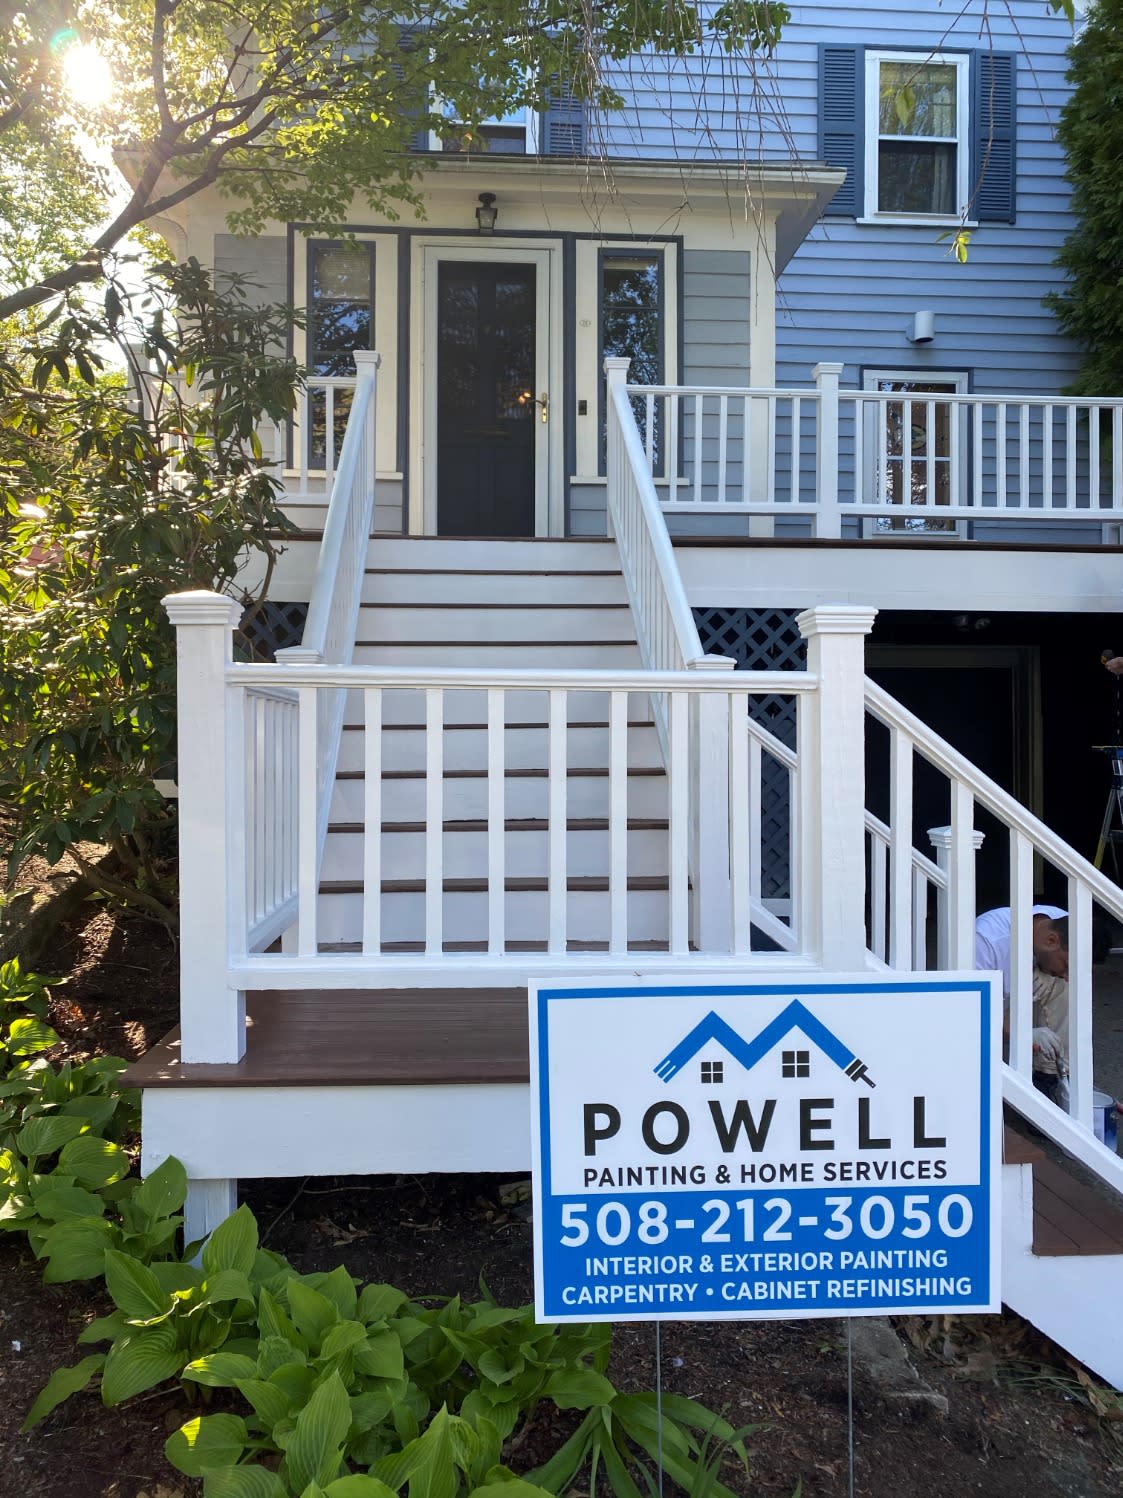 Powell Painting And Home Services, LLC Photo